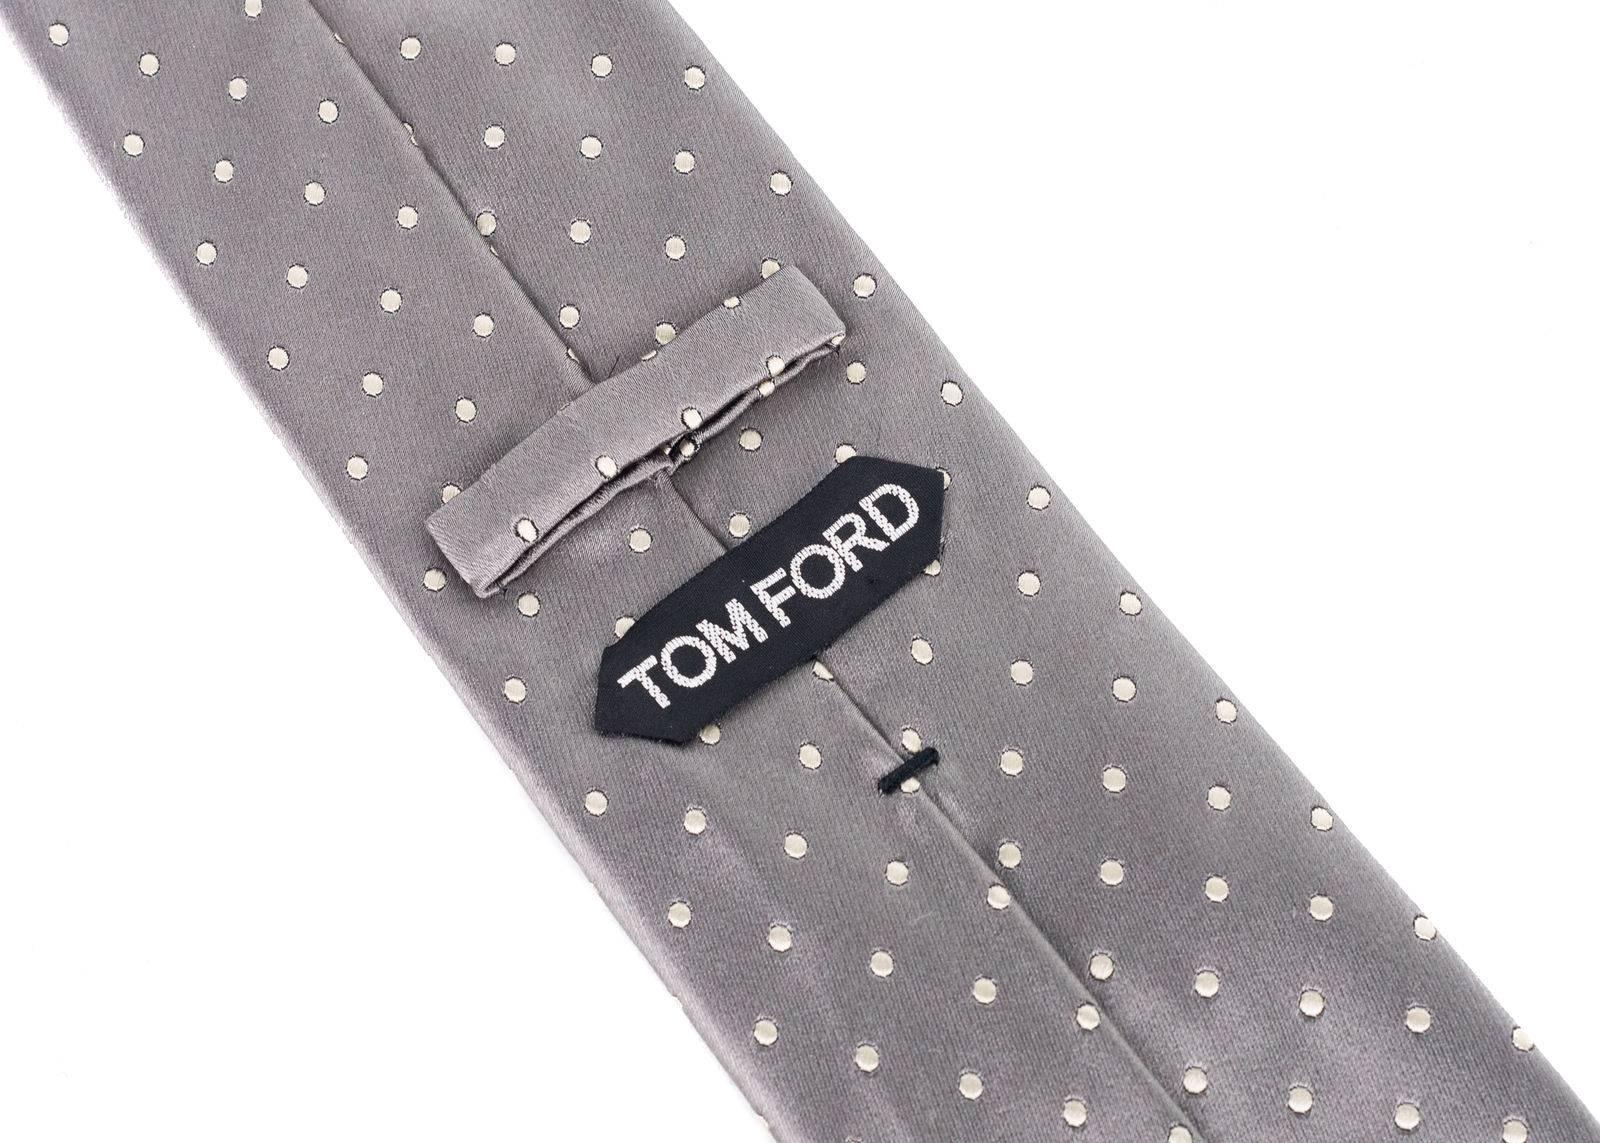 alian luxury brand, Tom Ford, has crafted these gorgeous Silk Tie for important special occasions and professional events. The tie is great to pair with your favorite solid color button down and blazers with your chosen pair or classic trousers.